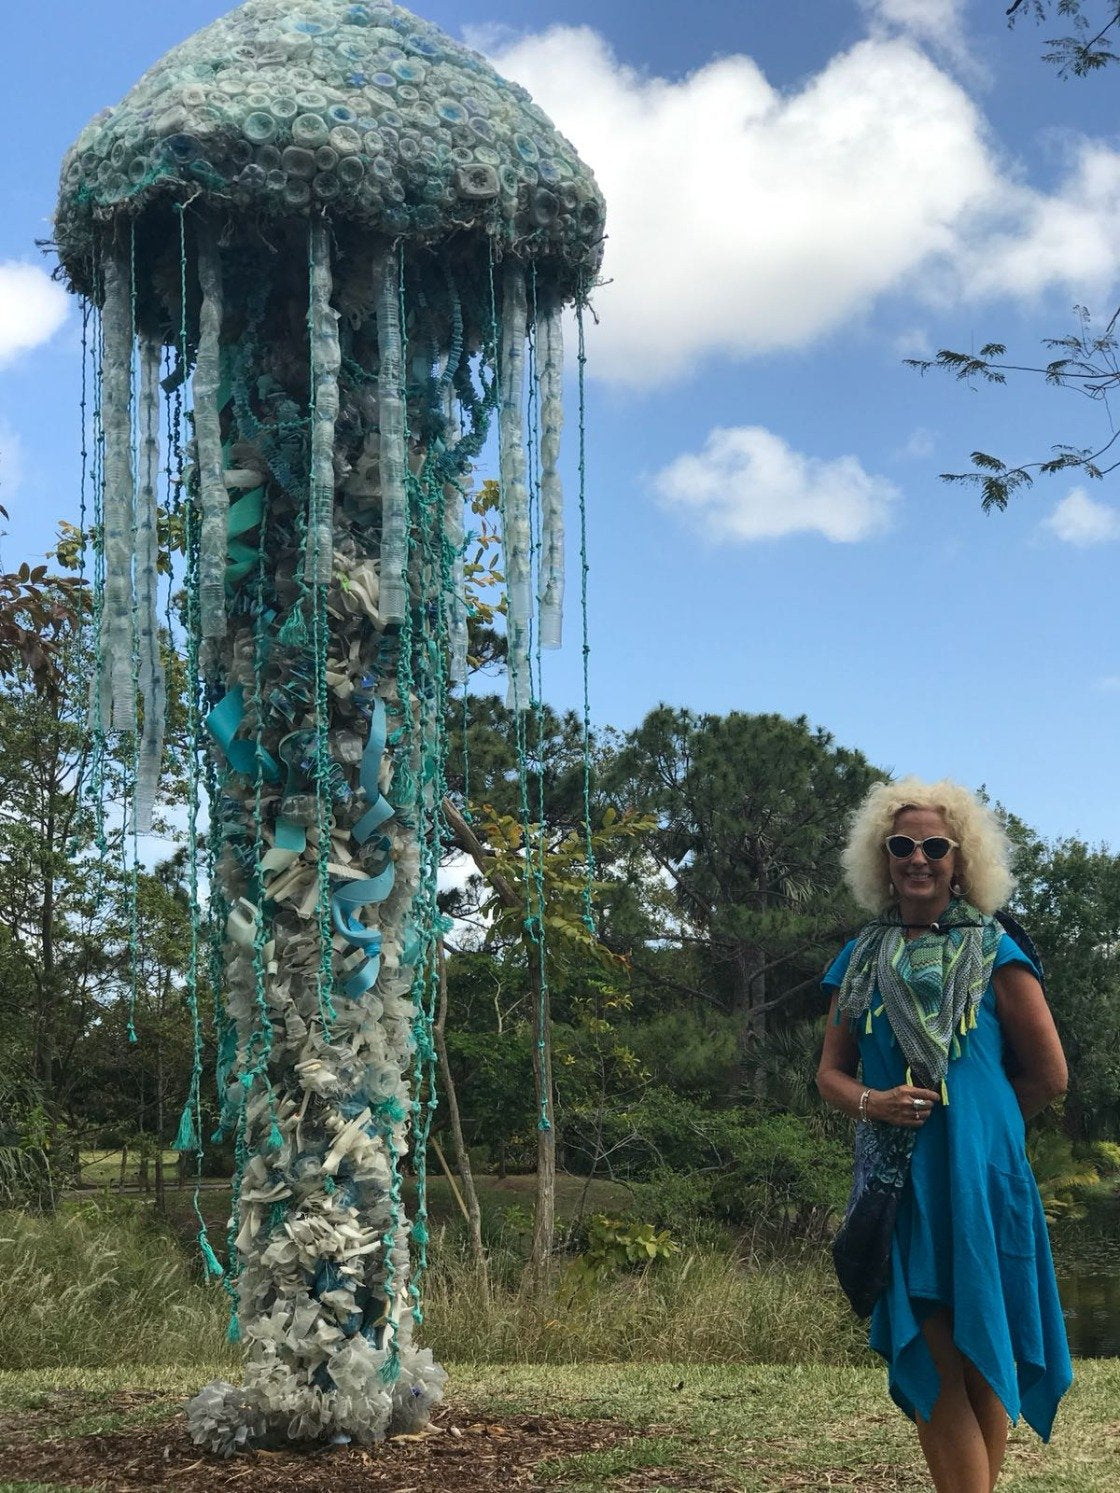 Washed Ashore - Art To Save The Sea - Jellyfish Exhibit